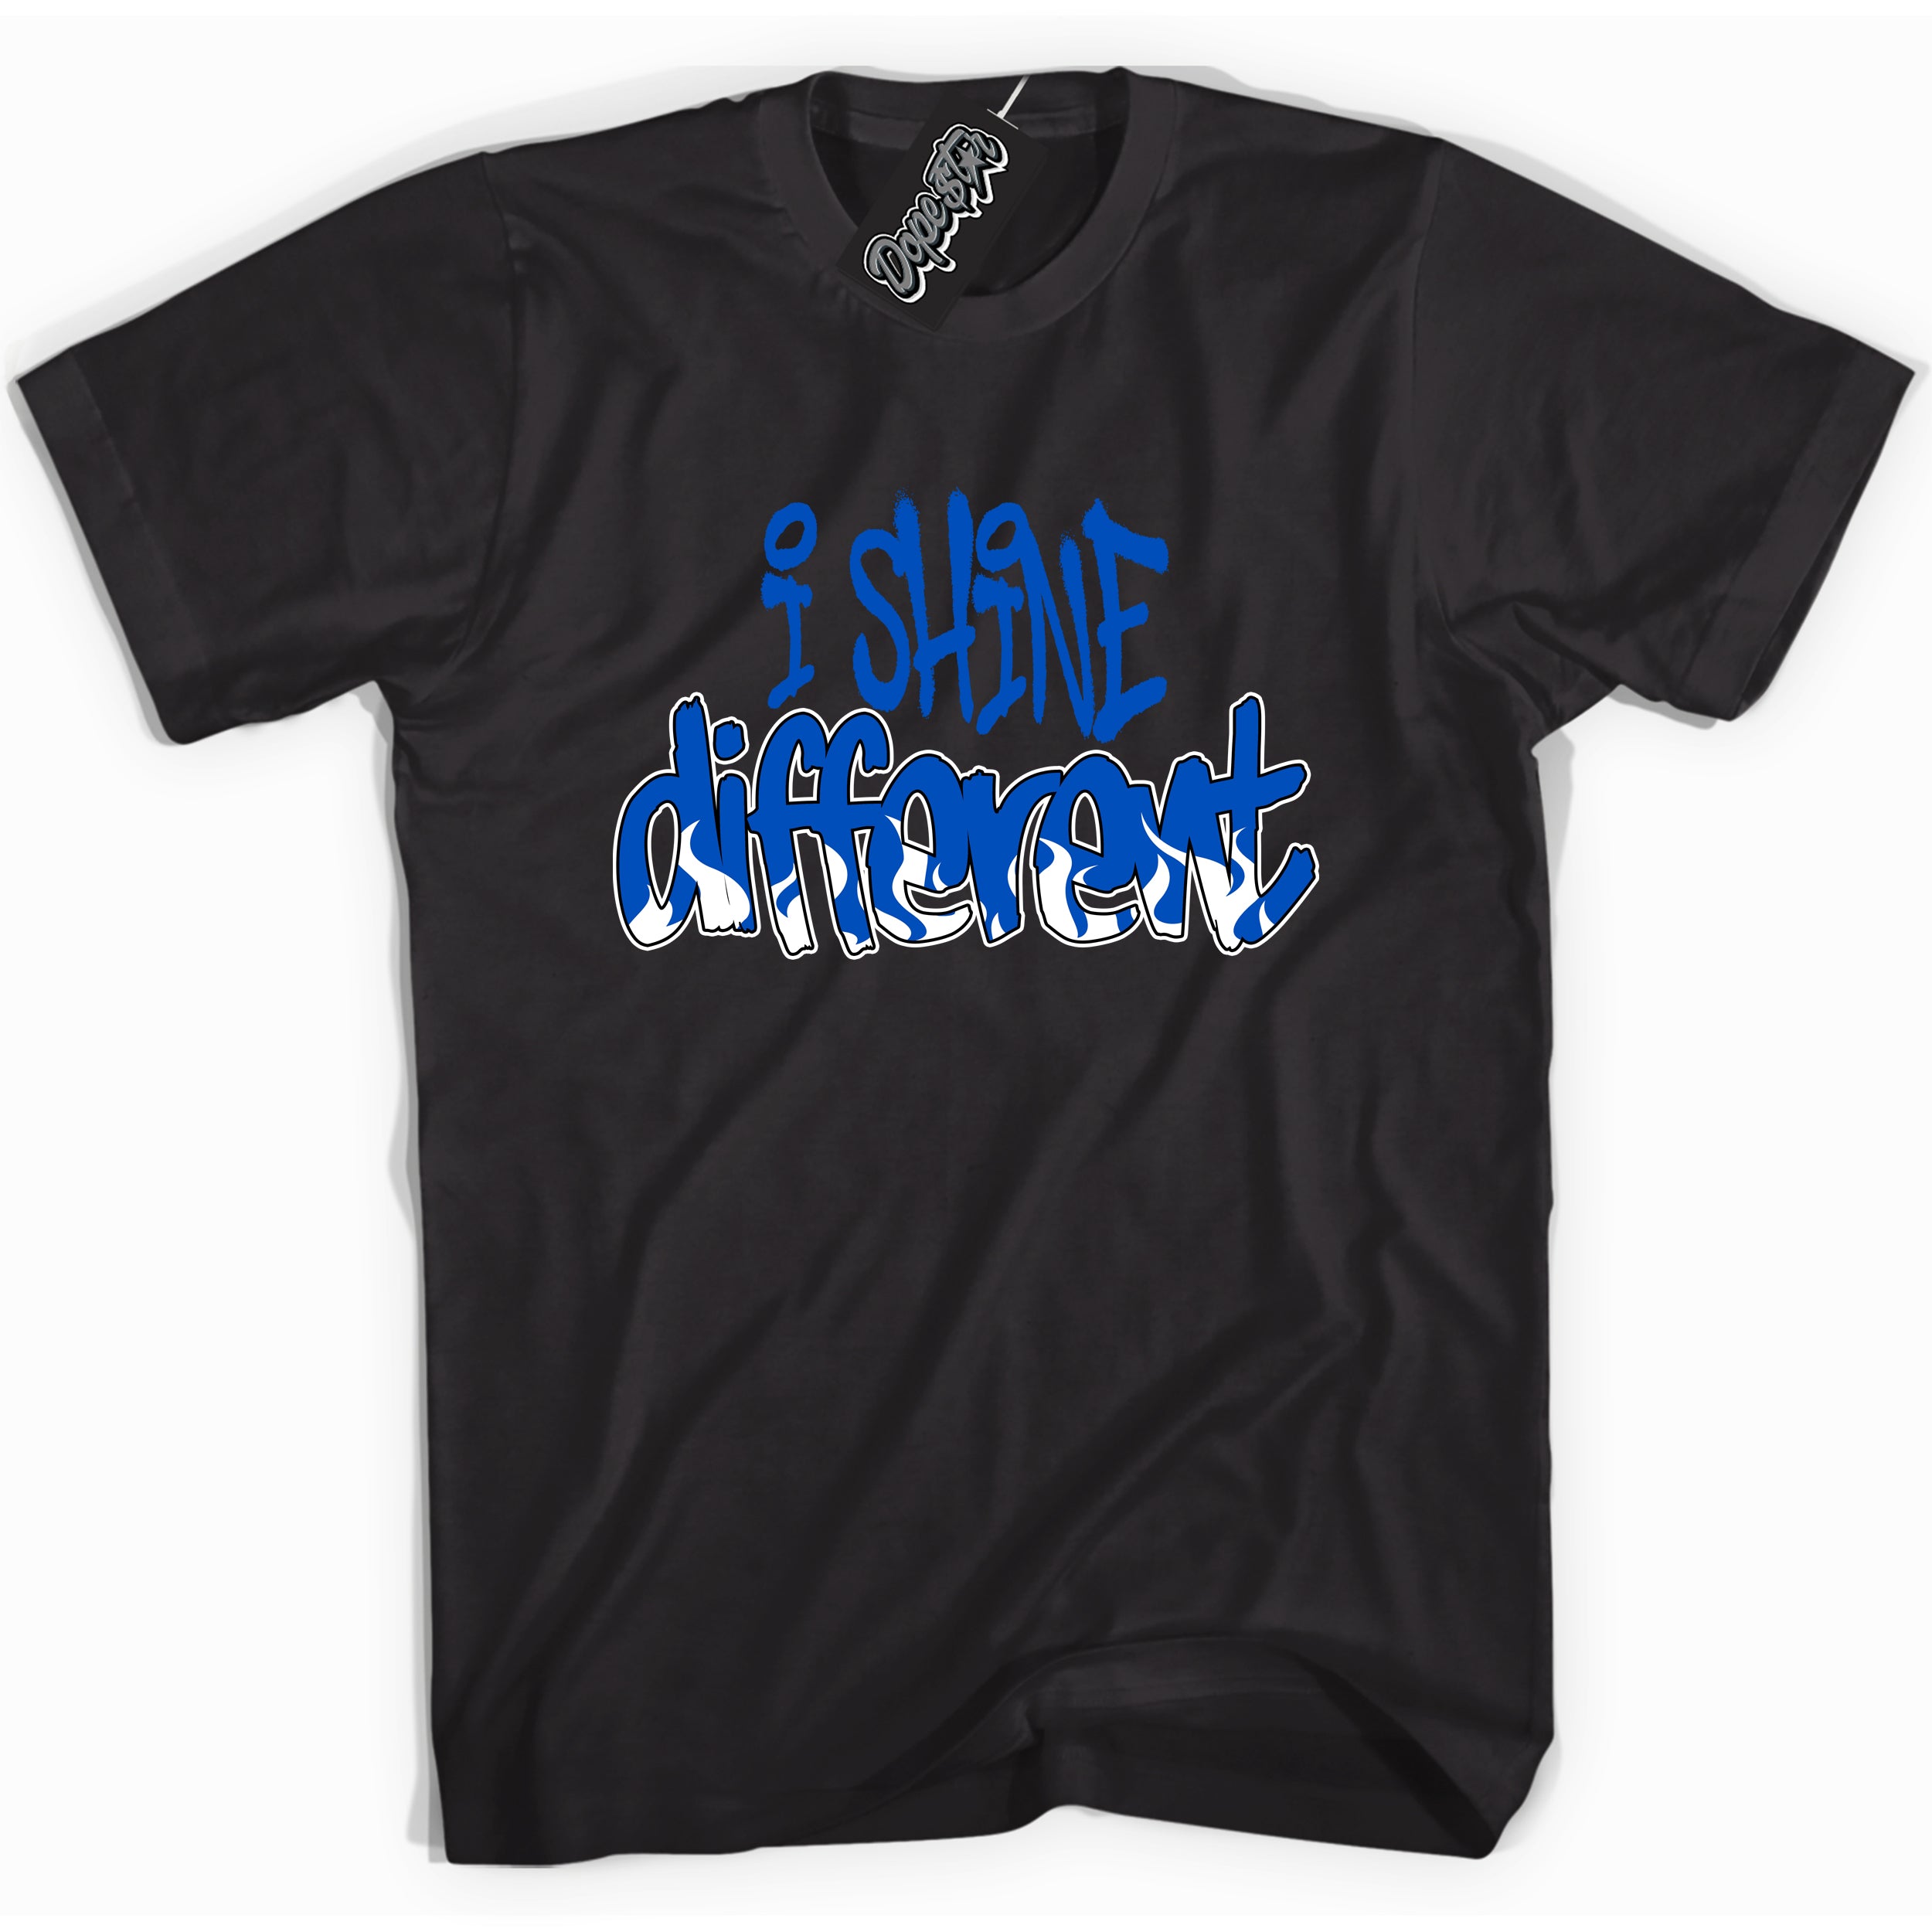 Cool Black graphic tee with I Shine Different print, that perfectly matches OG Royal Reimagined 1s sneakers 